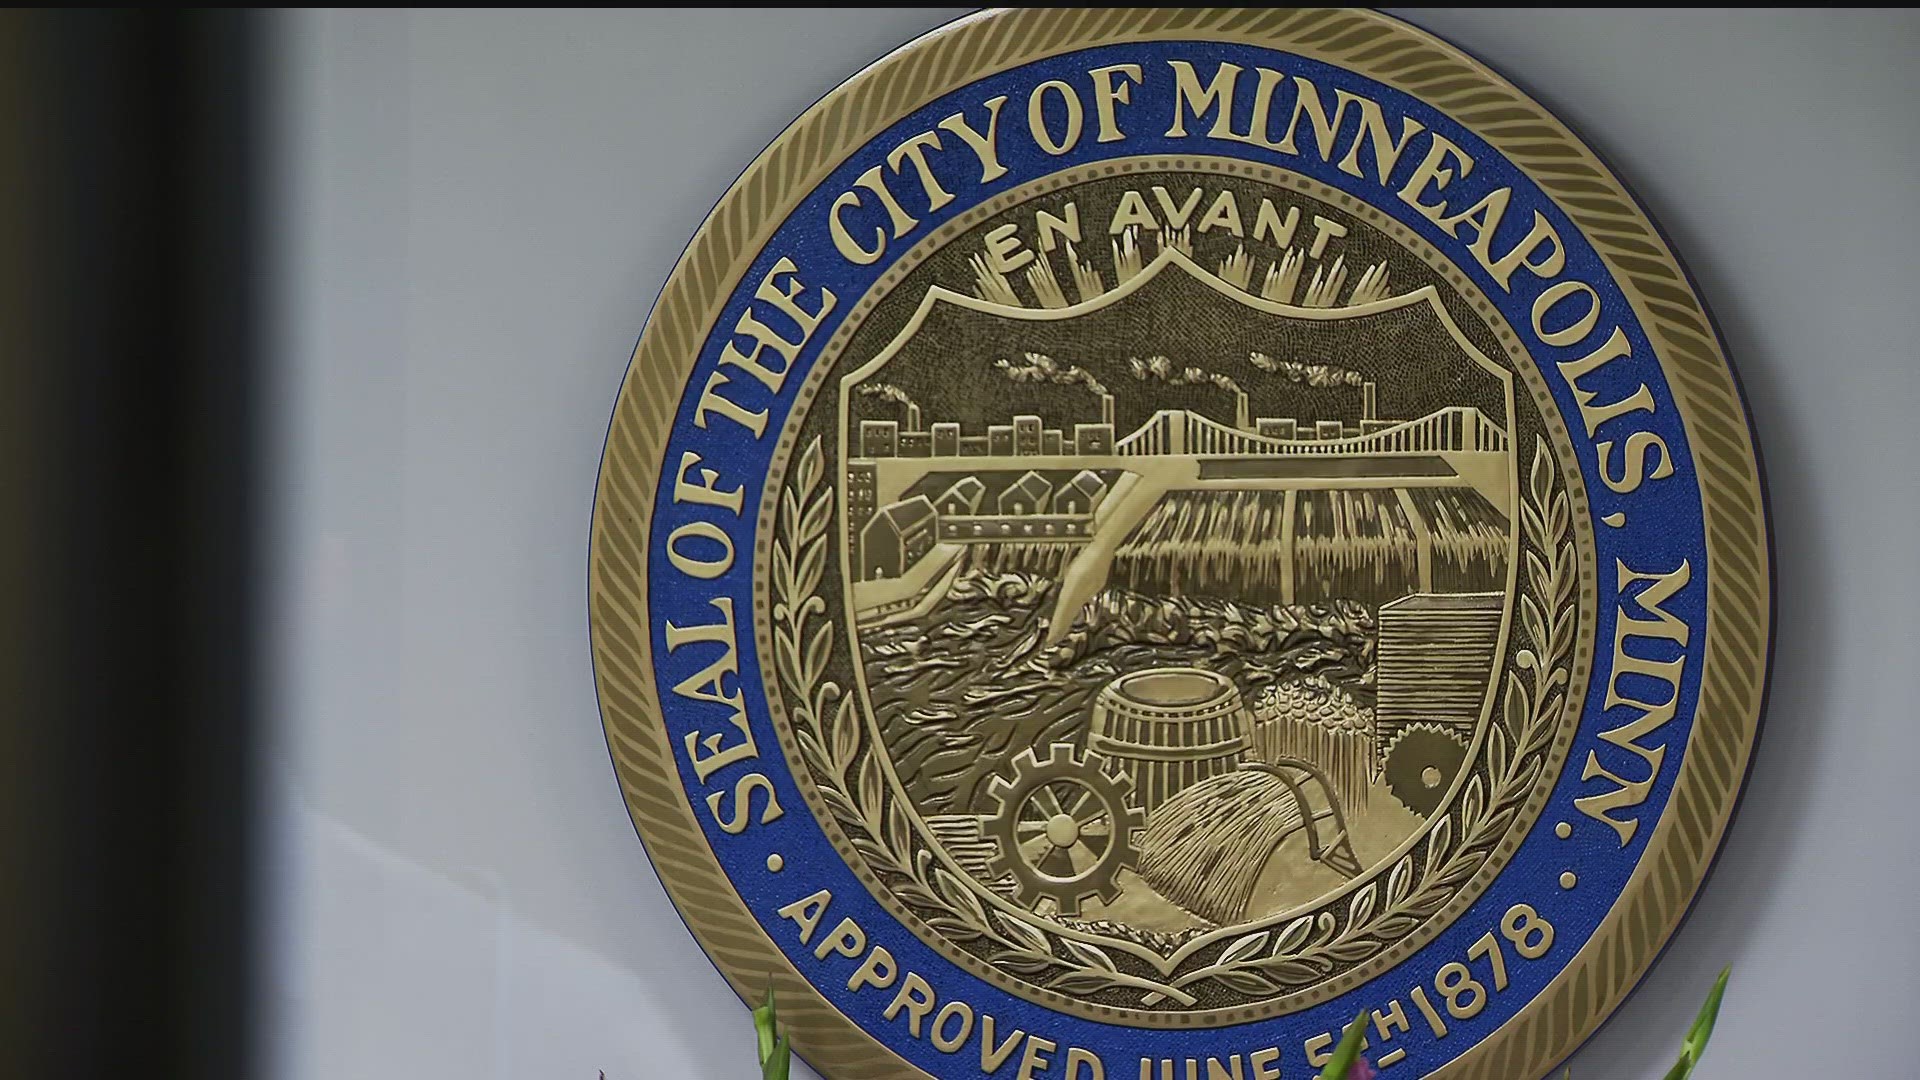 Some Minneapolis councilmembers said it's time the state helps crack down on threats against both councilors and other public employees.